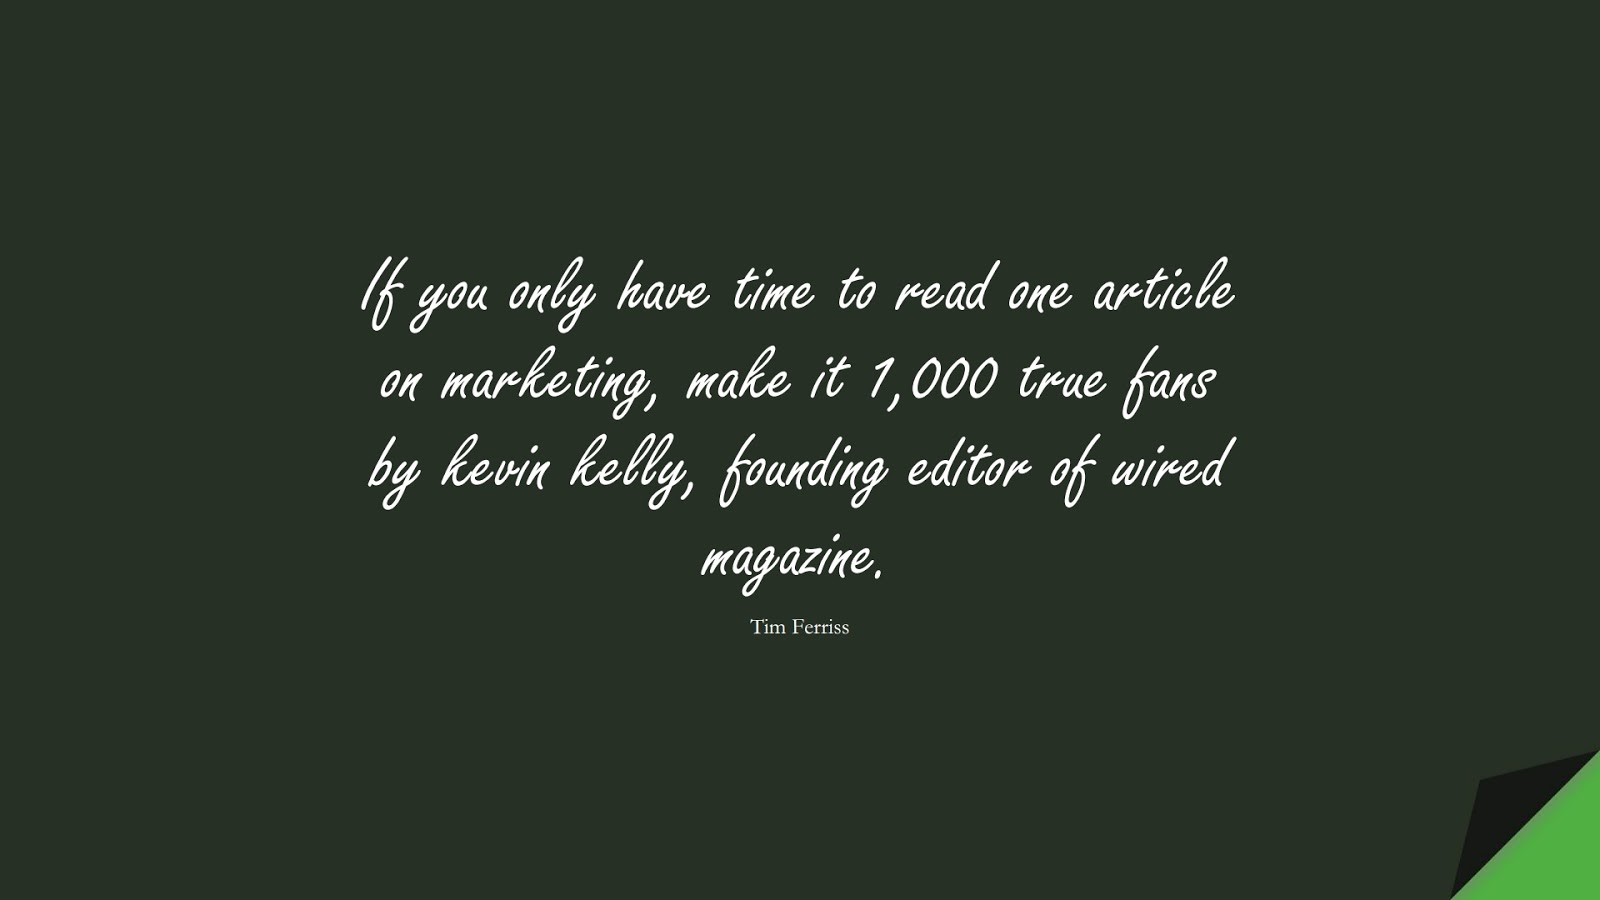 If you only have time to read one article on marketing, make it 1,000 true fans by kevin kelly, founding editor of wired magazine. (Tim Ferriss);  #TimFerrissQuotes